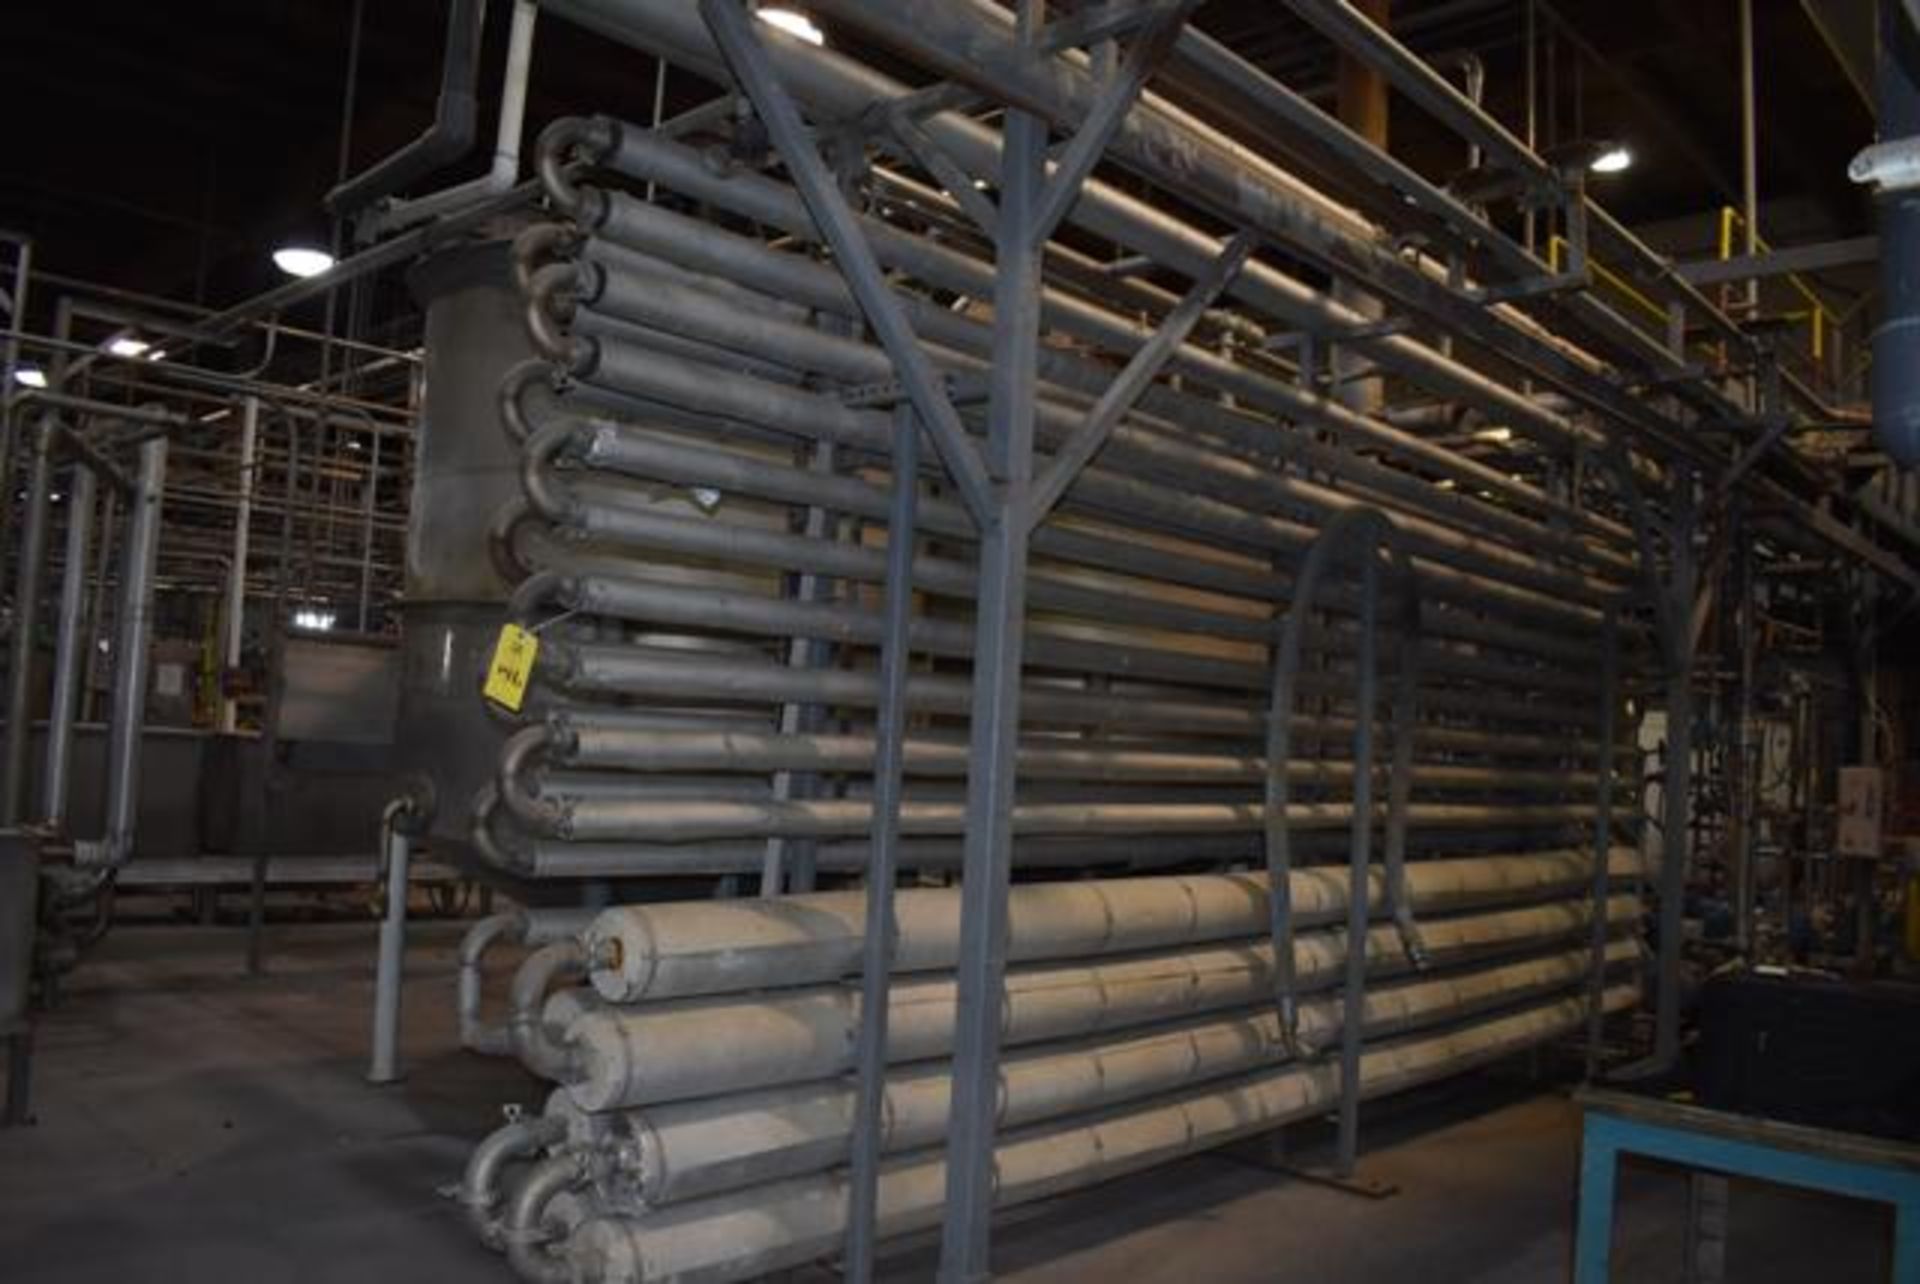 Stainless Steel Tube Type Process System, 20' Length, RIGGING FEE: $750